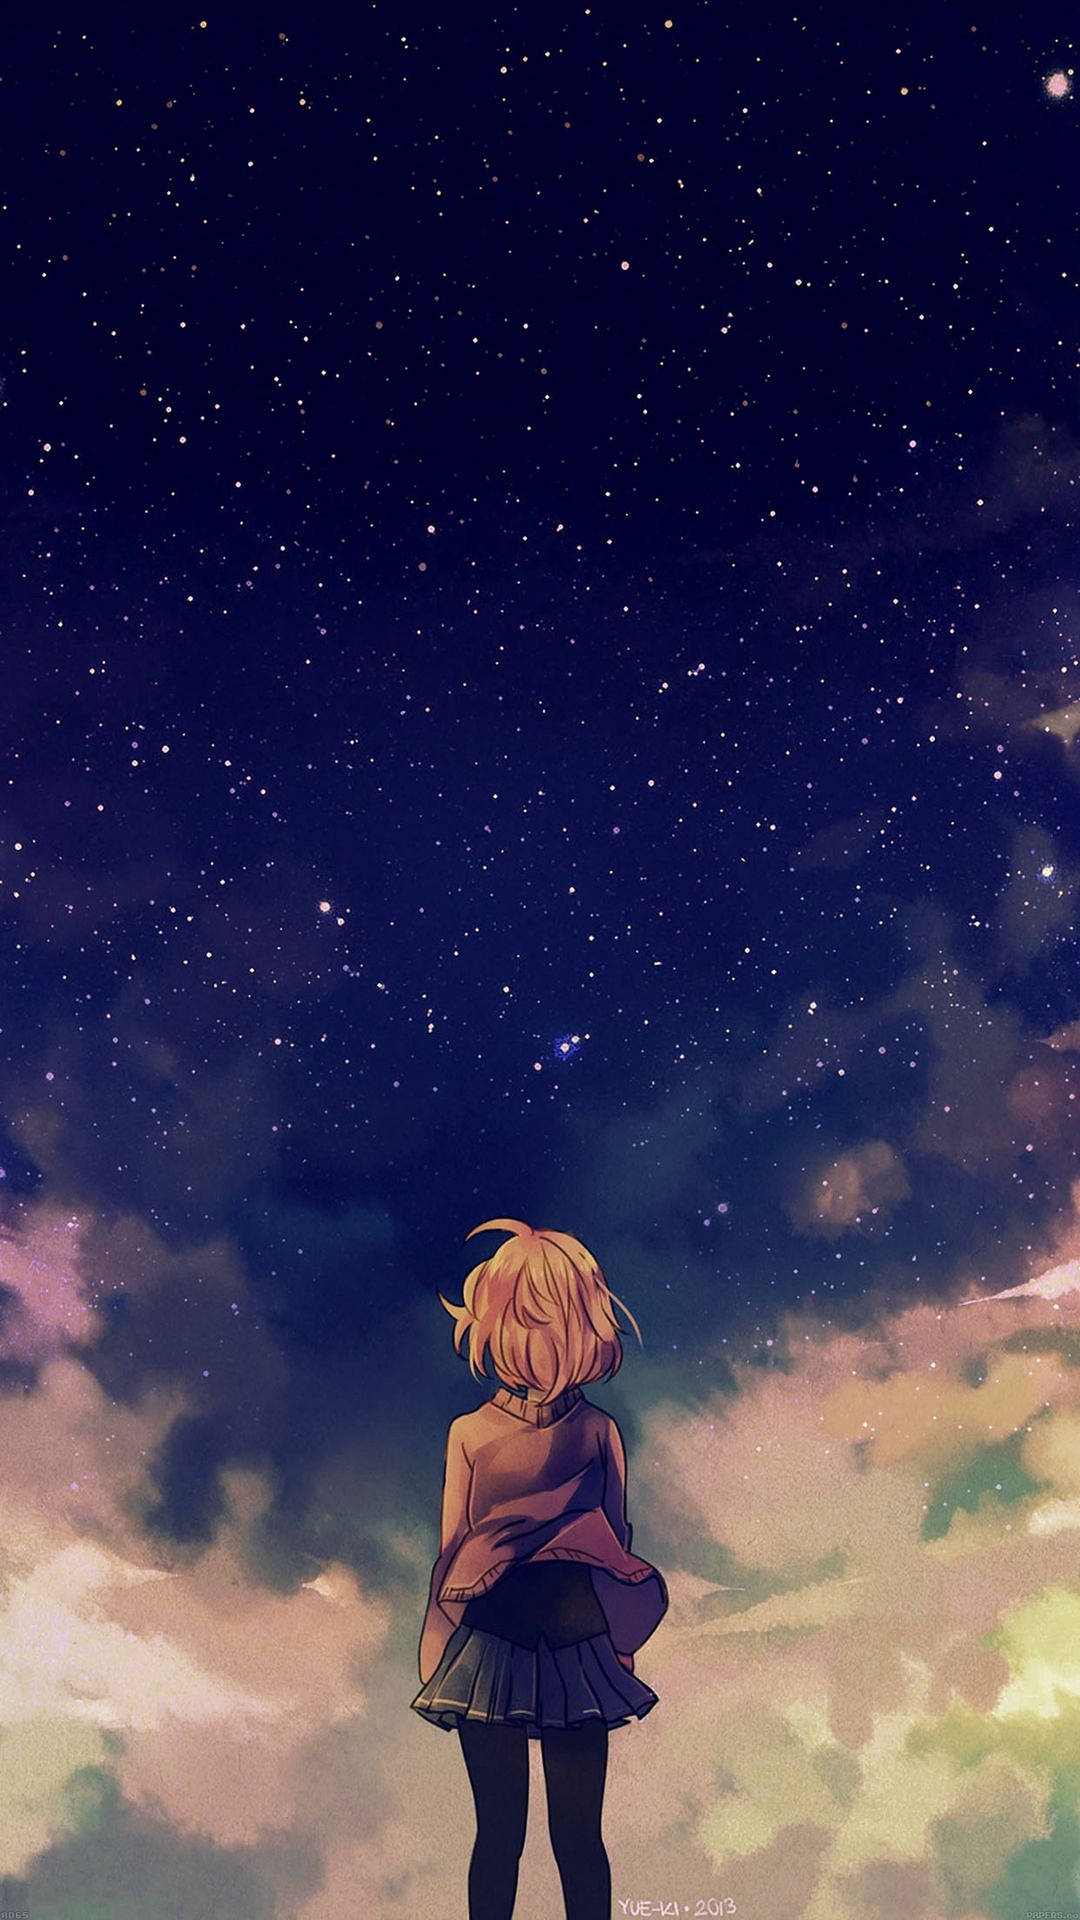 300+] Anime Iphone Wallpapers 